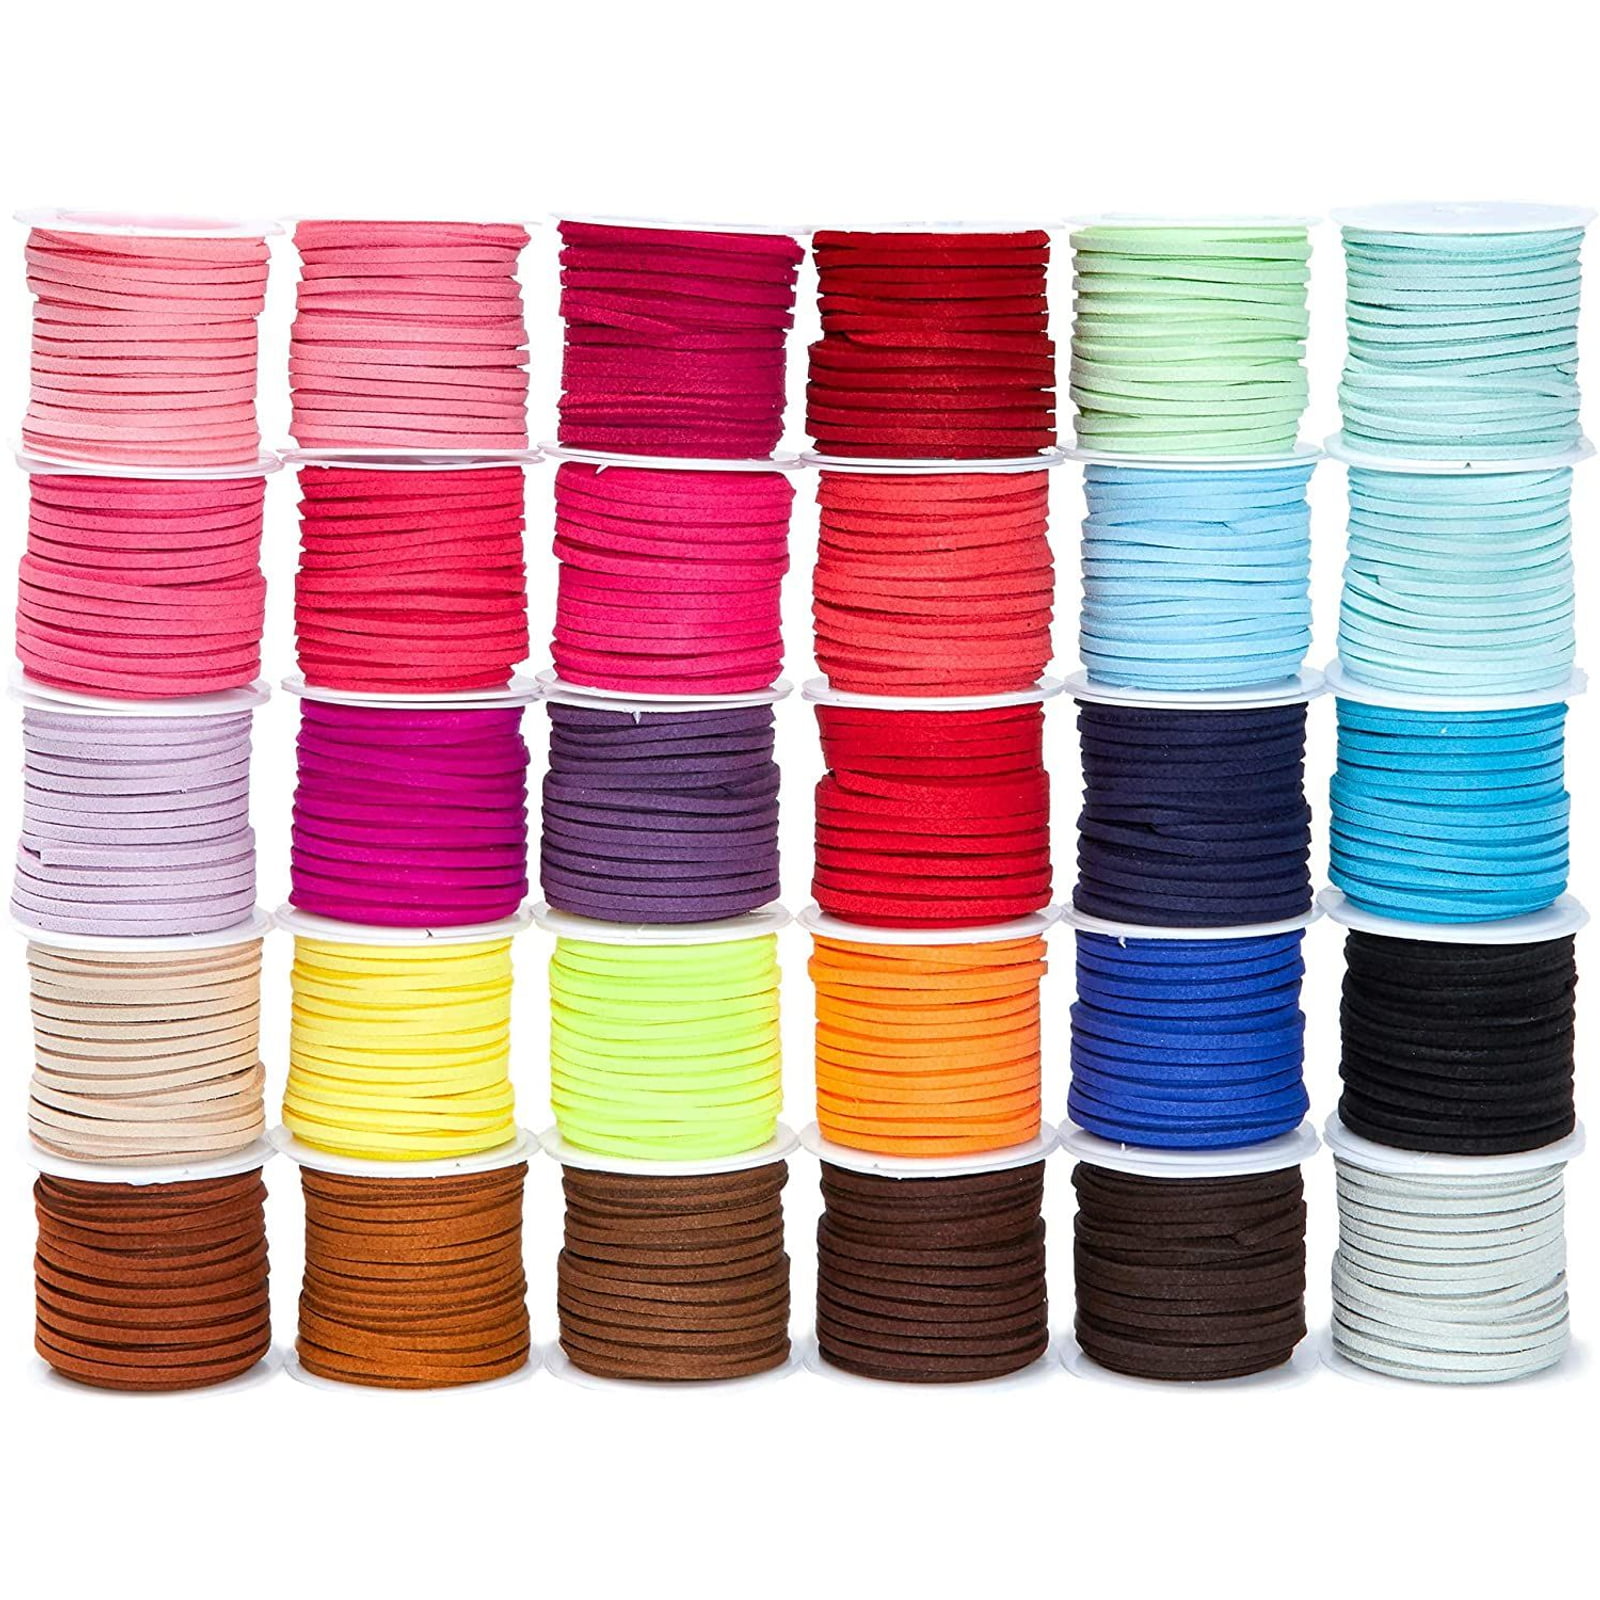 Top Candy Color Premium Nylon Macrame Cord Thread For Diy Bracelet Necklace Roll 